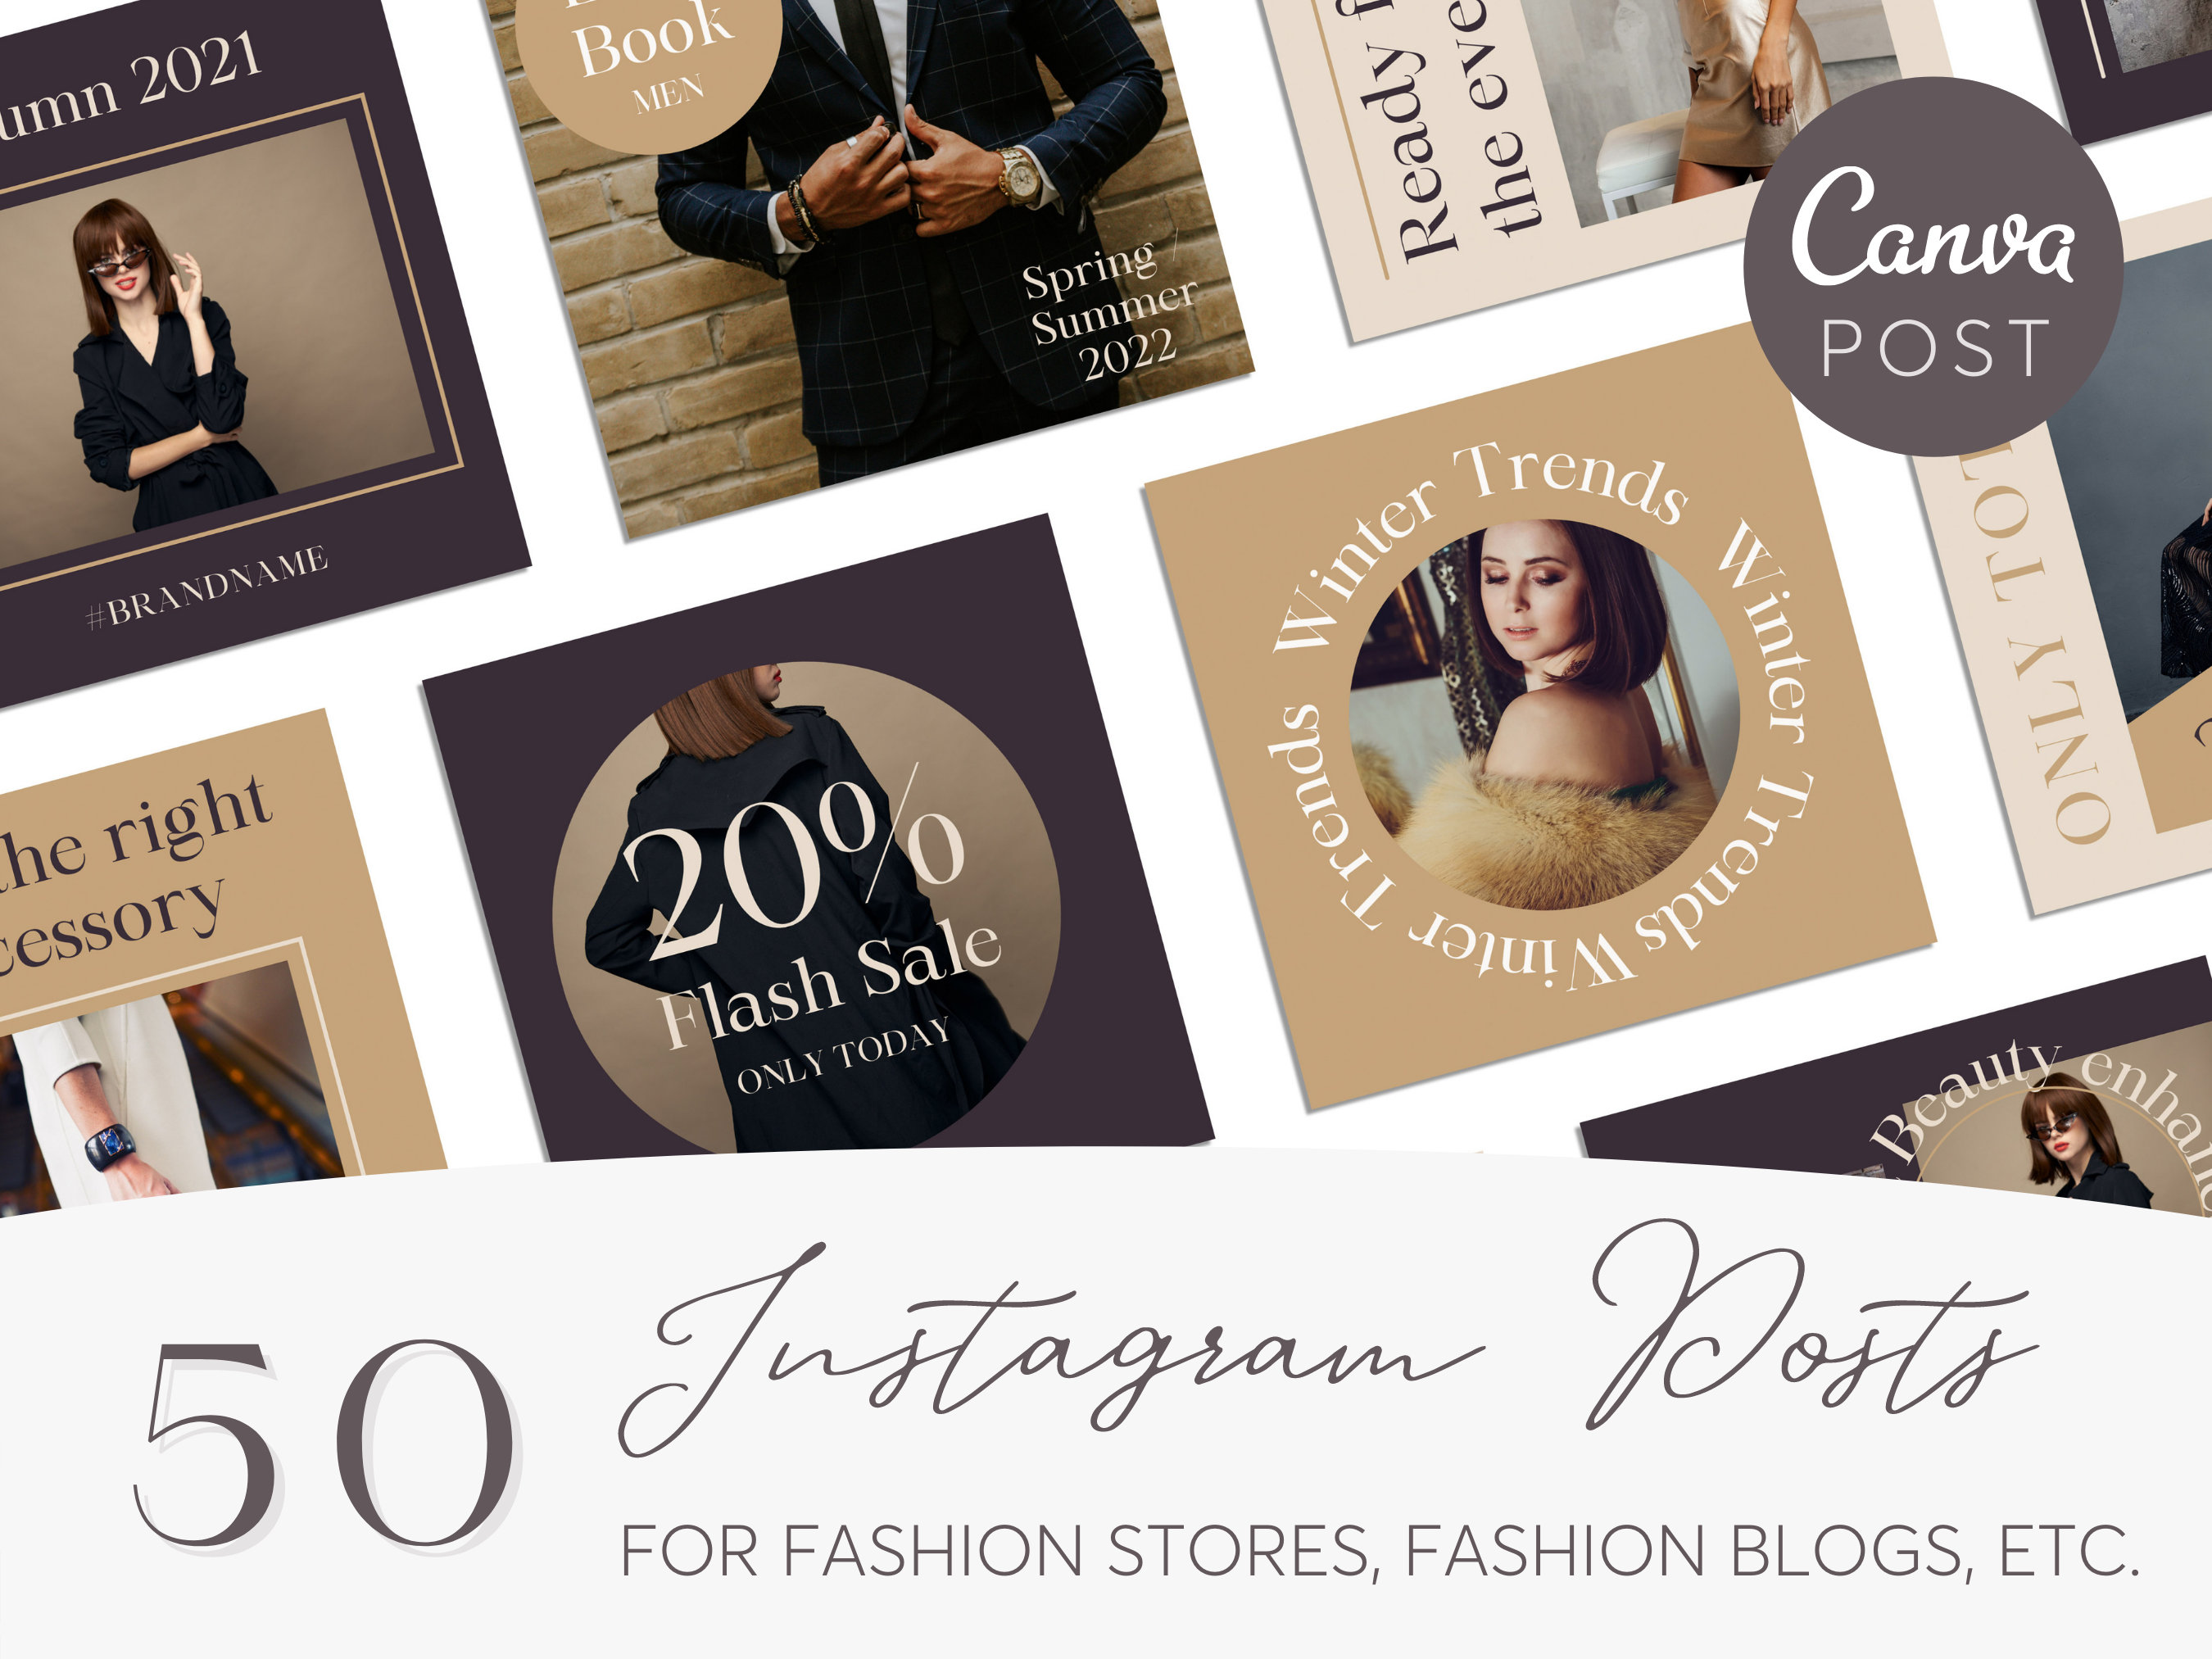 Instagram dbook: Clothes, Outfits, Brands, Style and Looks